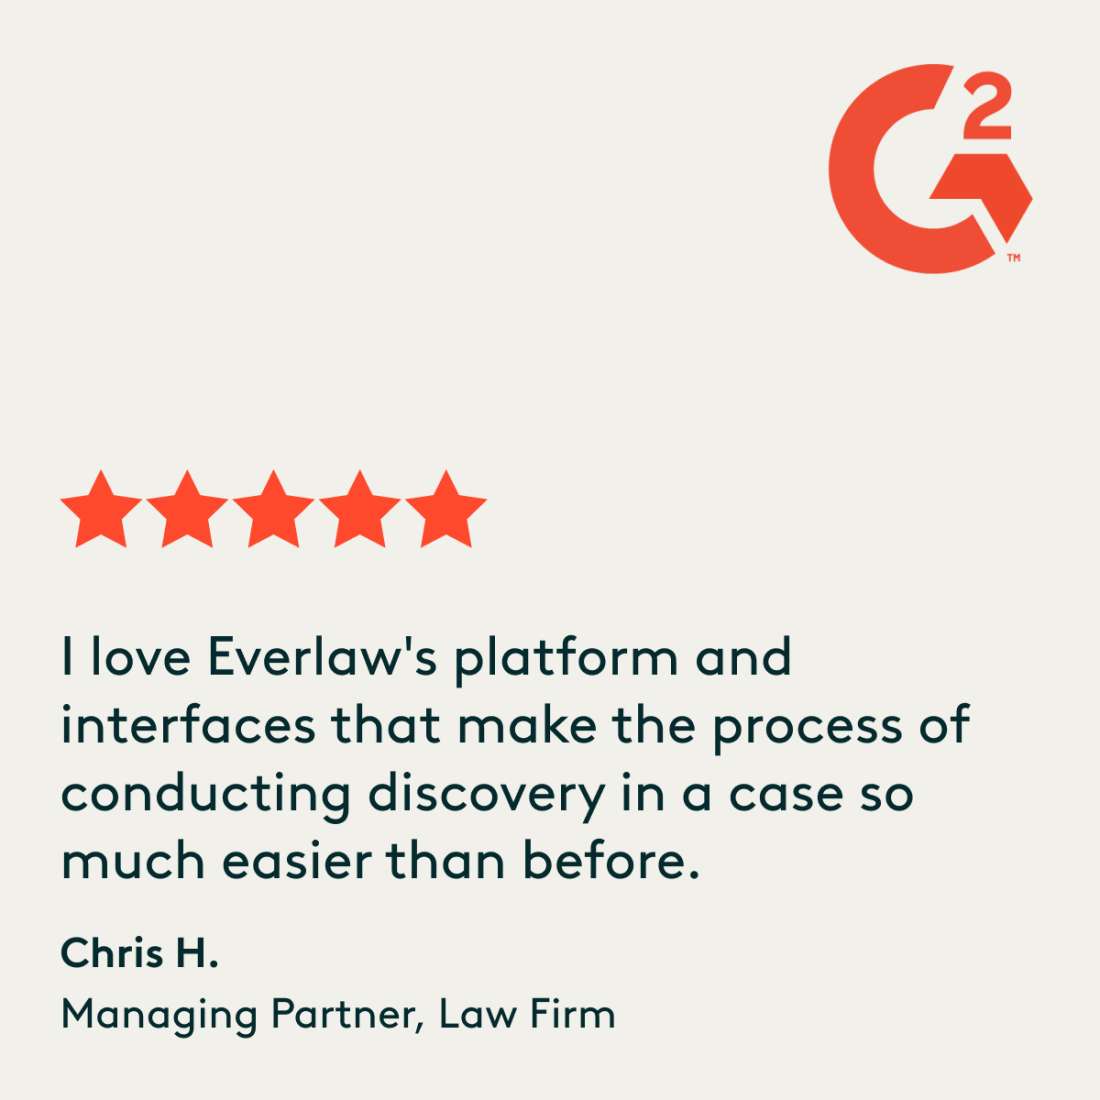 G2 Quote Card, Chris H., Managing Partner, Law Firm